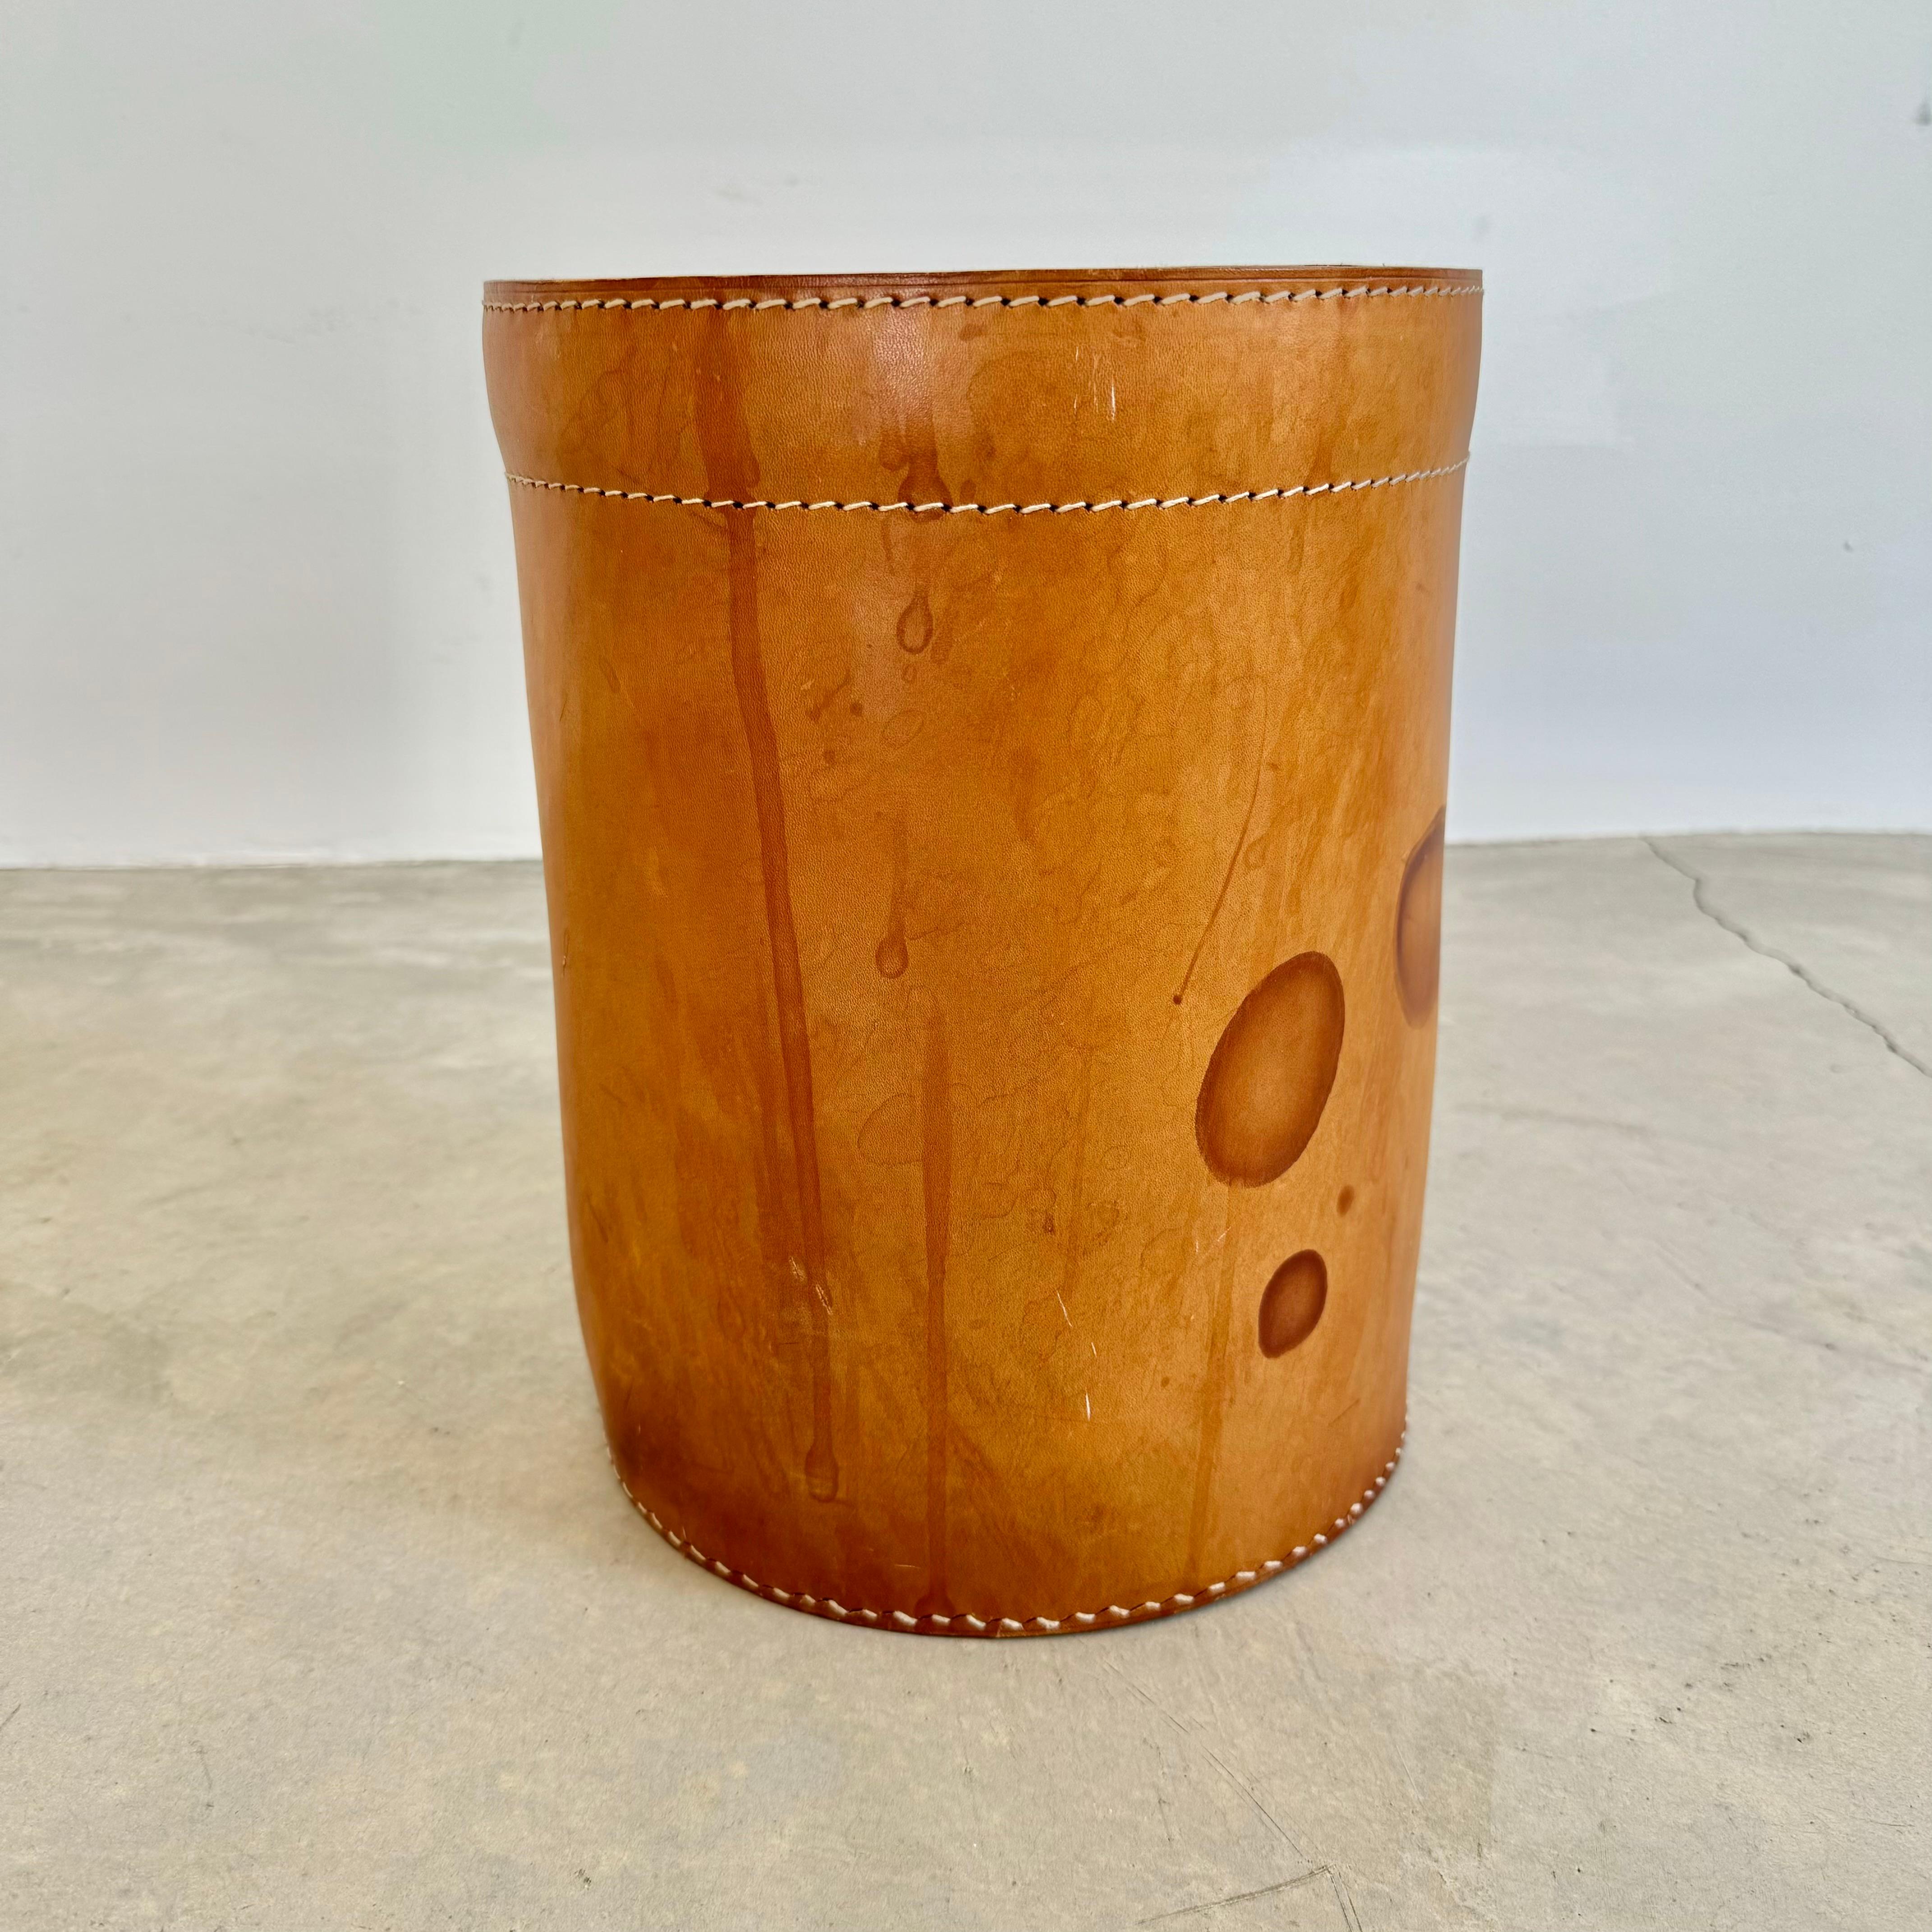 Jacques Adnet Style Saddle Leather Waste Basket, 1950s France In Good Condition For Sale In Los Angeles, CA